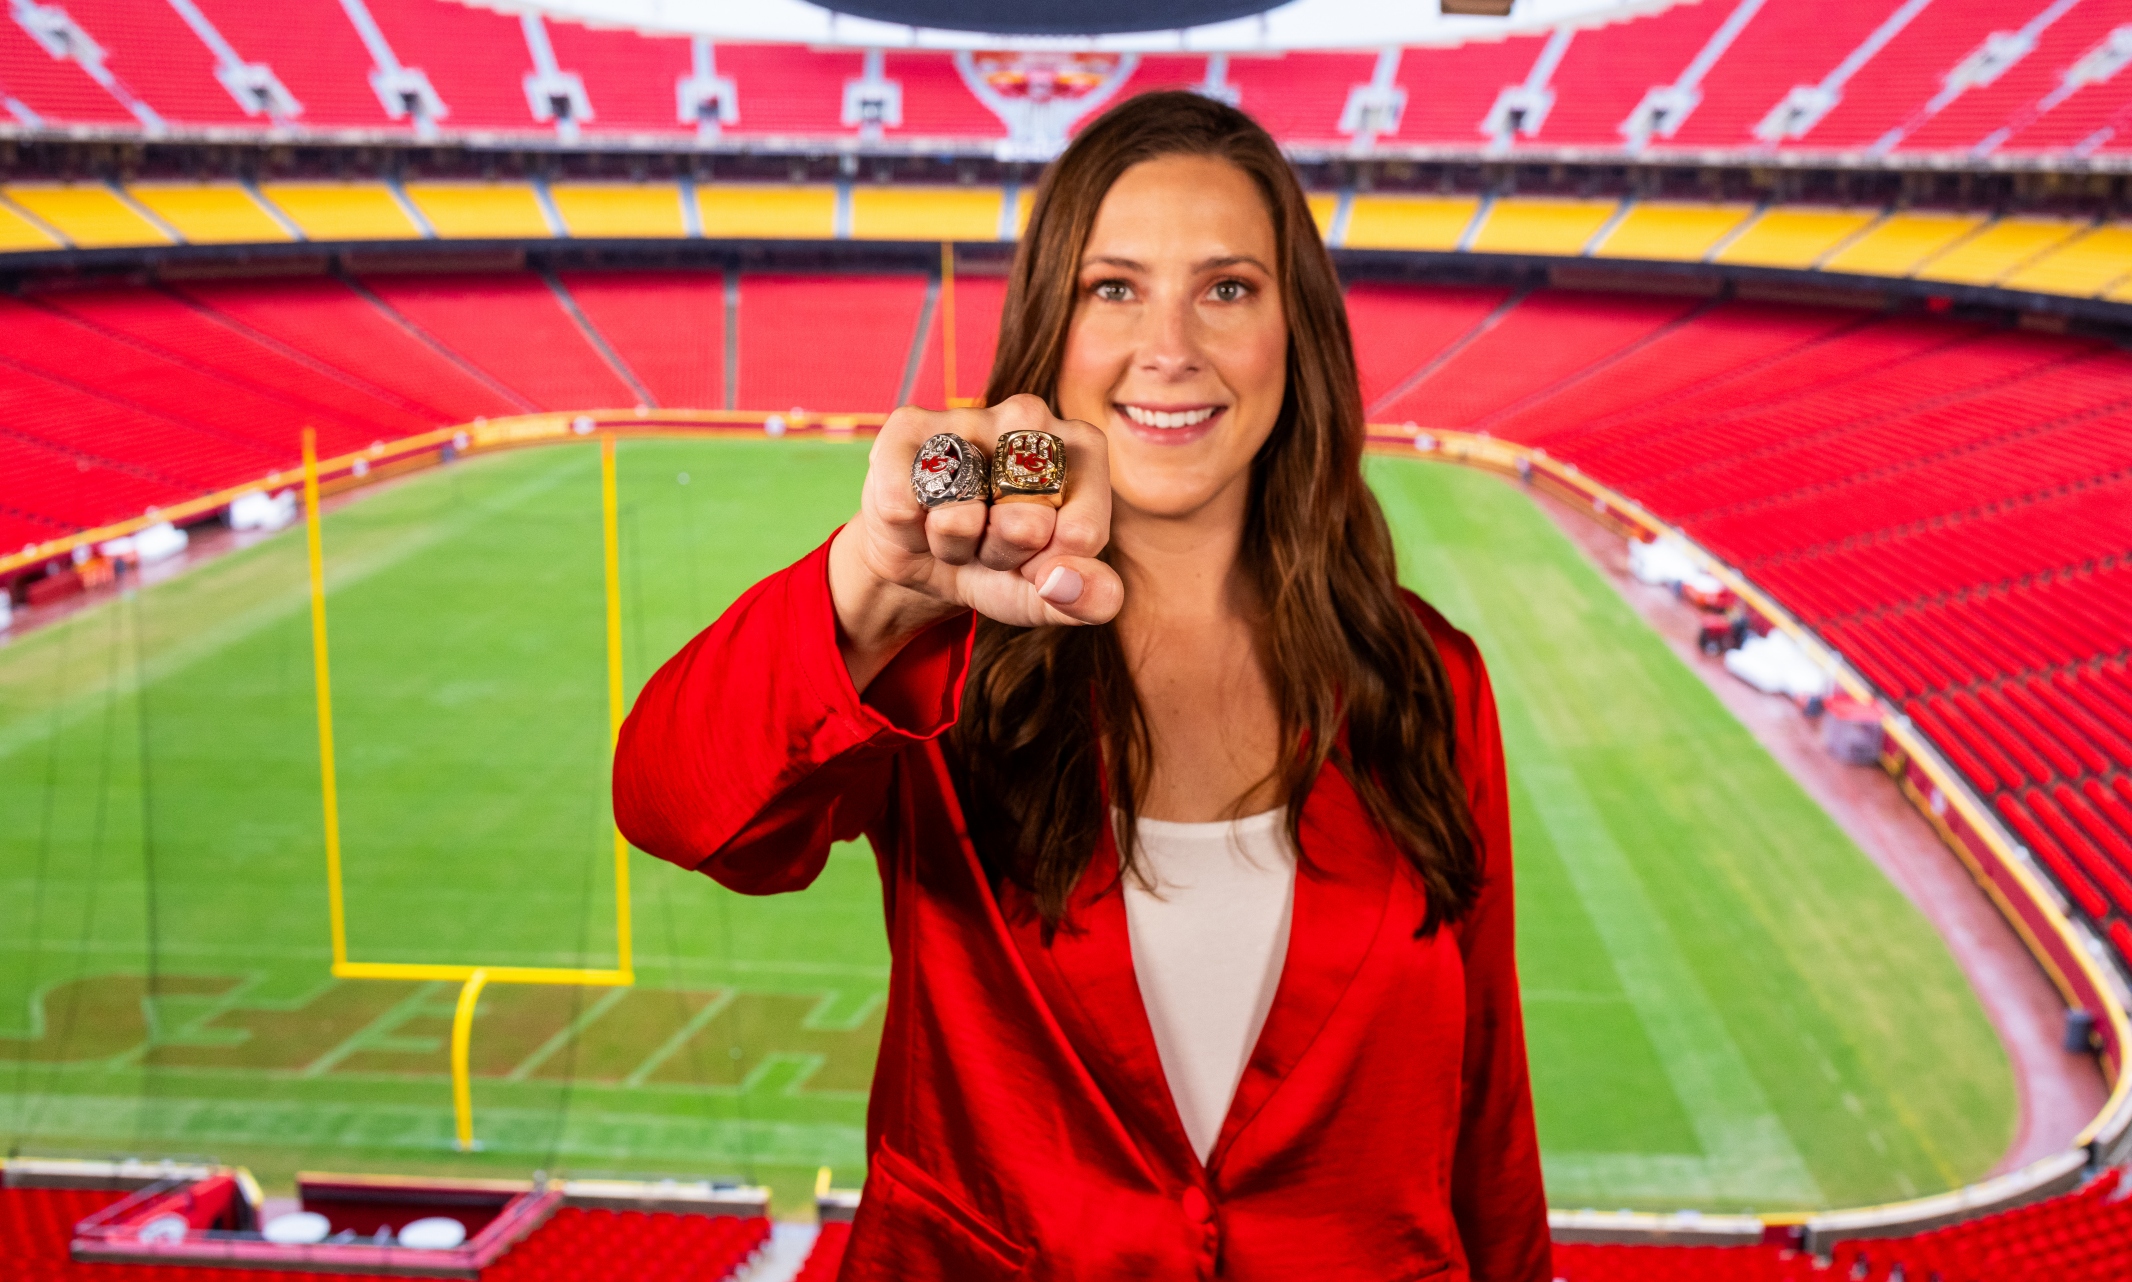 Meghan Jaben stands in the seating bowl of Arrowhead Stadium overlooking the field. Standing in a red blazer and smiling, Meghan's arm is outstretched in front of her in a fist with two super bowl rings on her fingers.